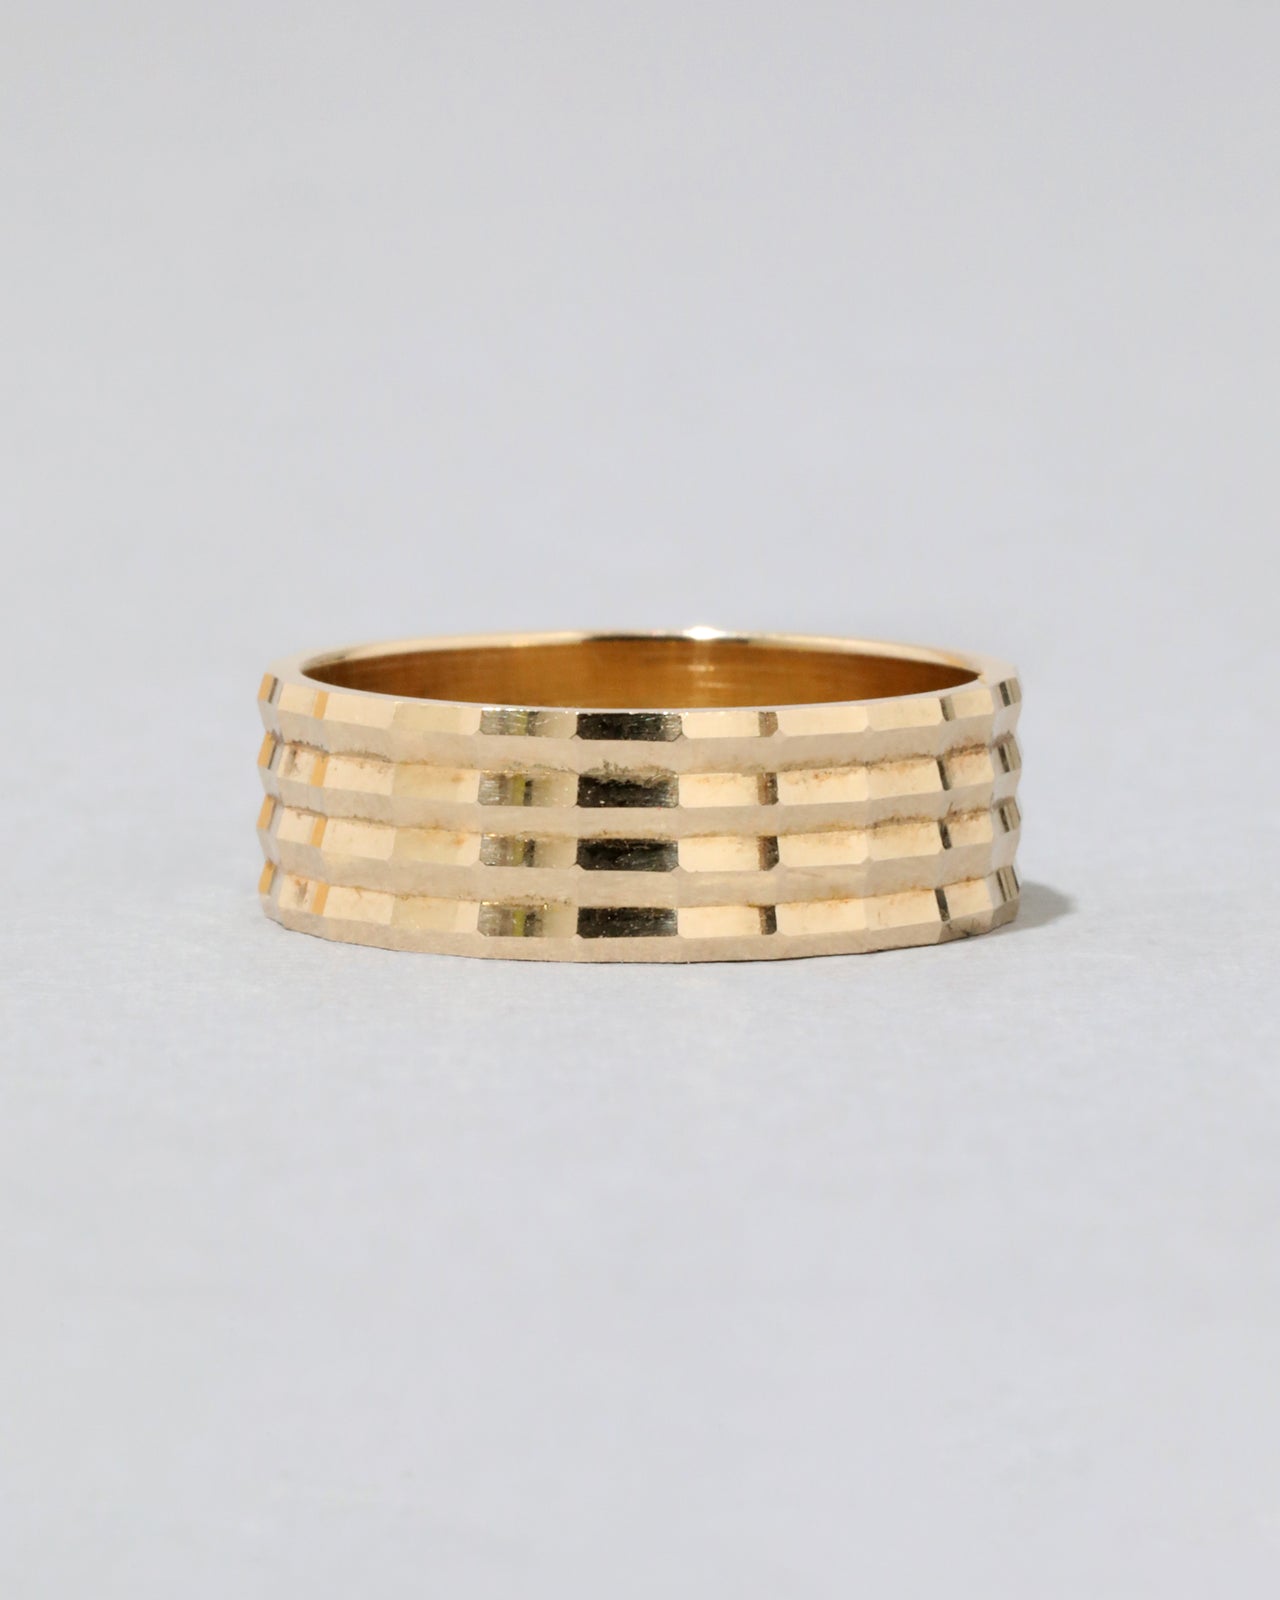 Vintage 1980s 14k Gold Faceted Band Ring - Photo 2